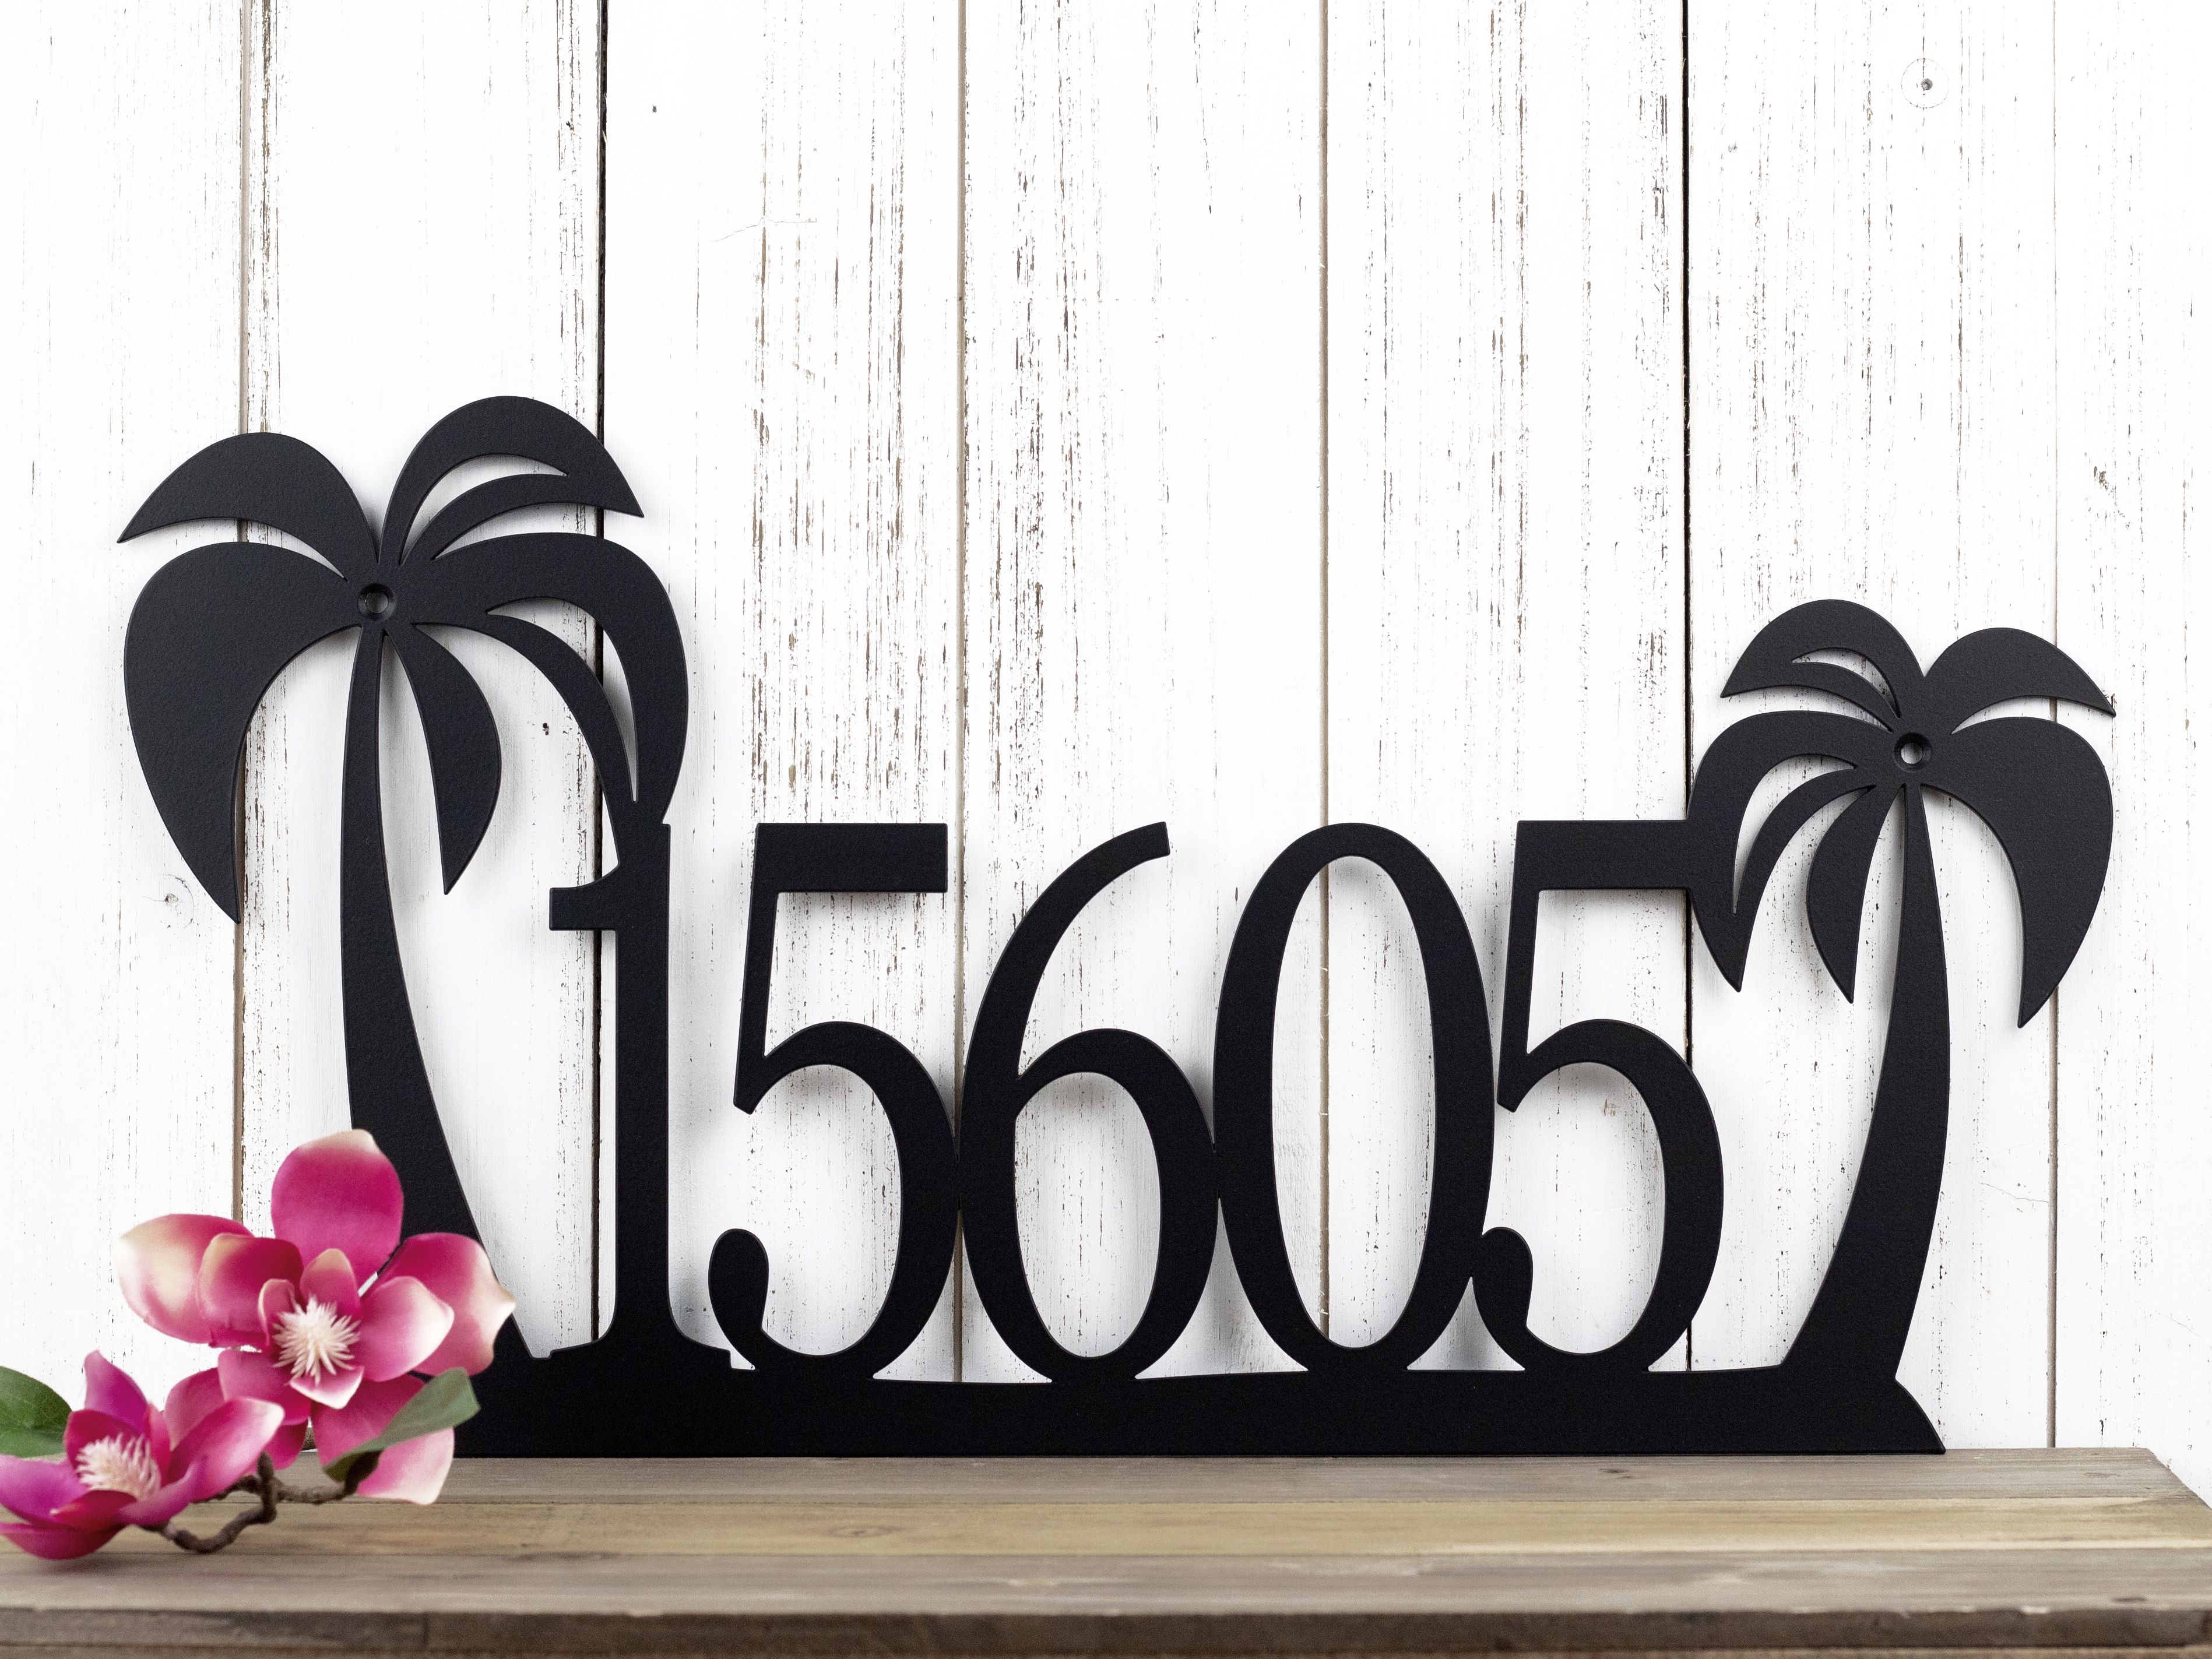 Details about   Personalized Palm Trees Metal House Number Address Black Sign